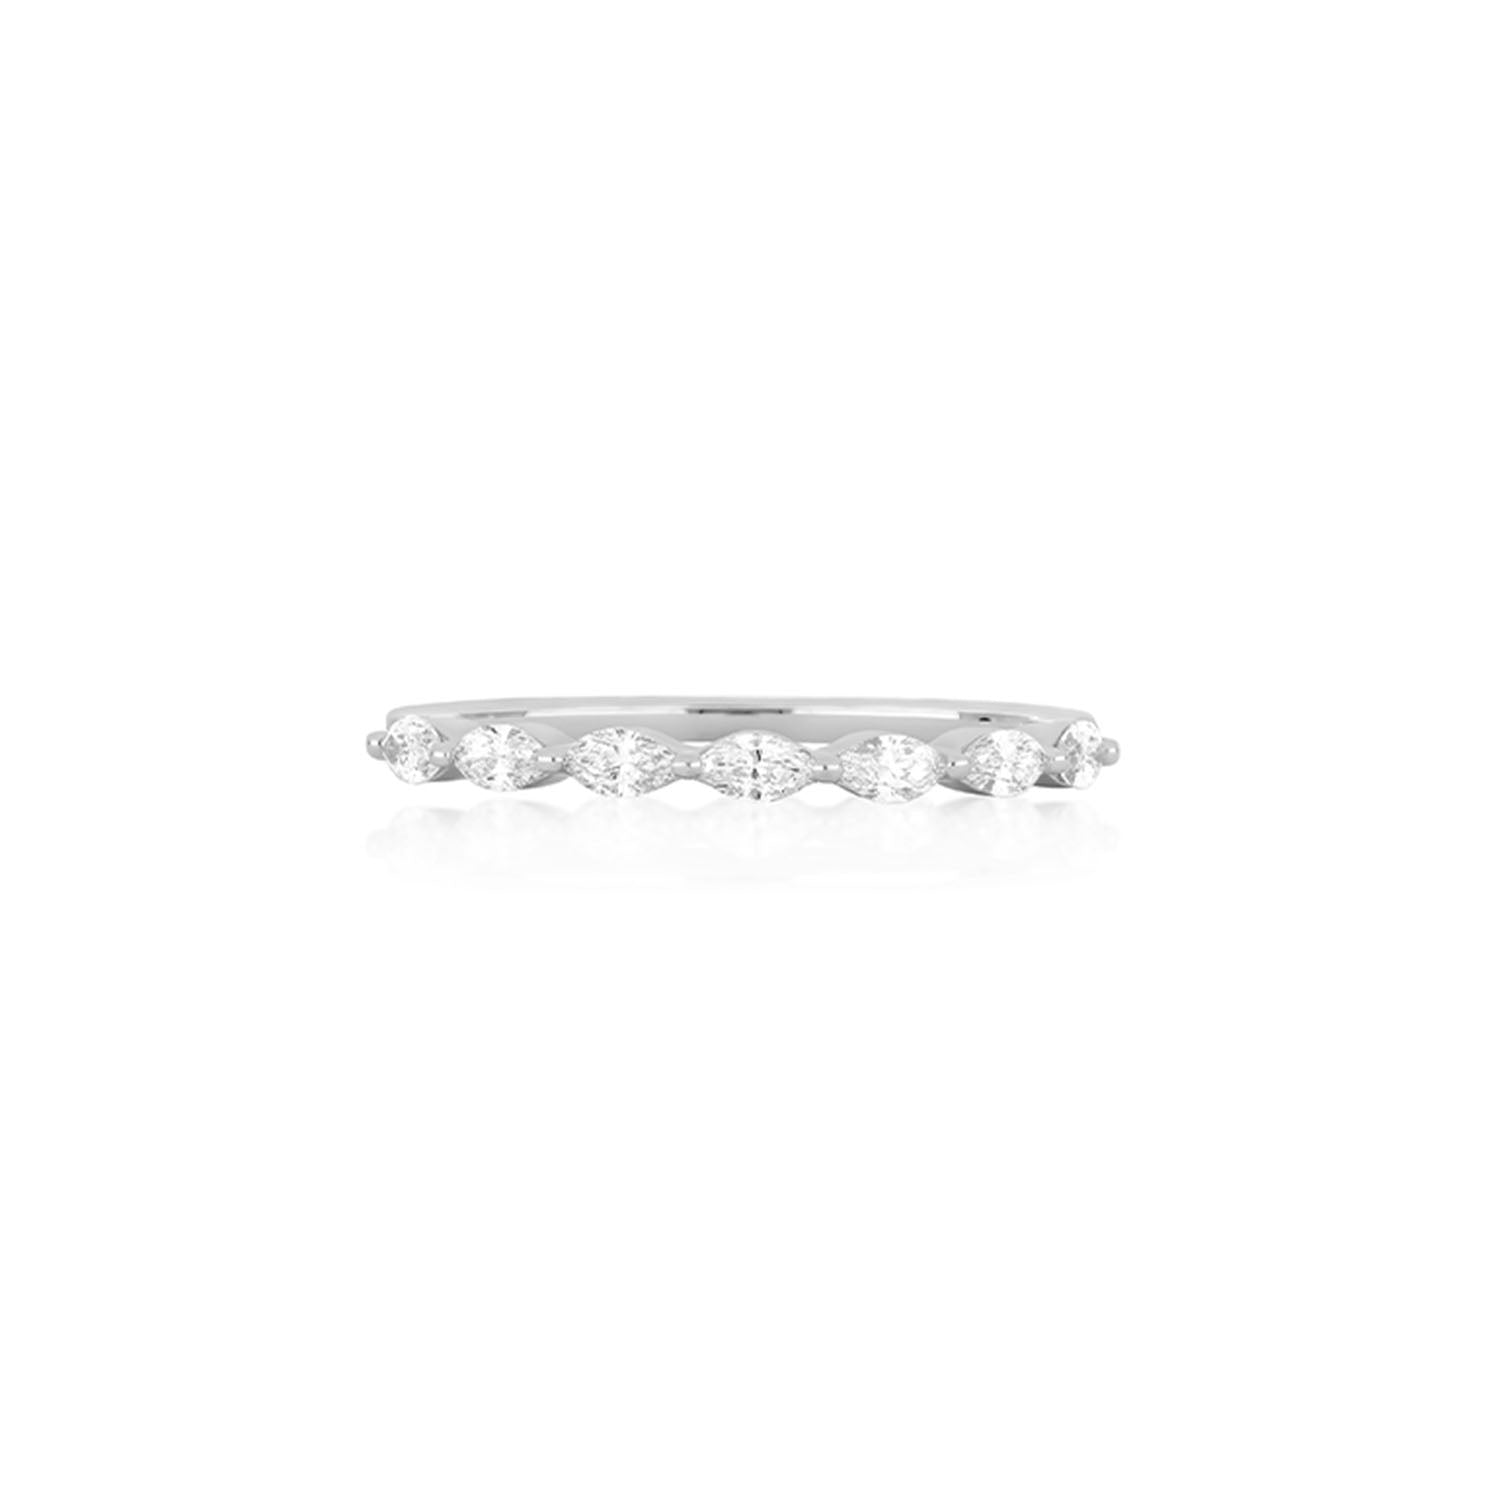 Half Marquise Diamond Ring in white gold